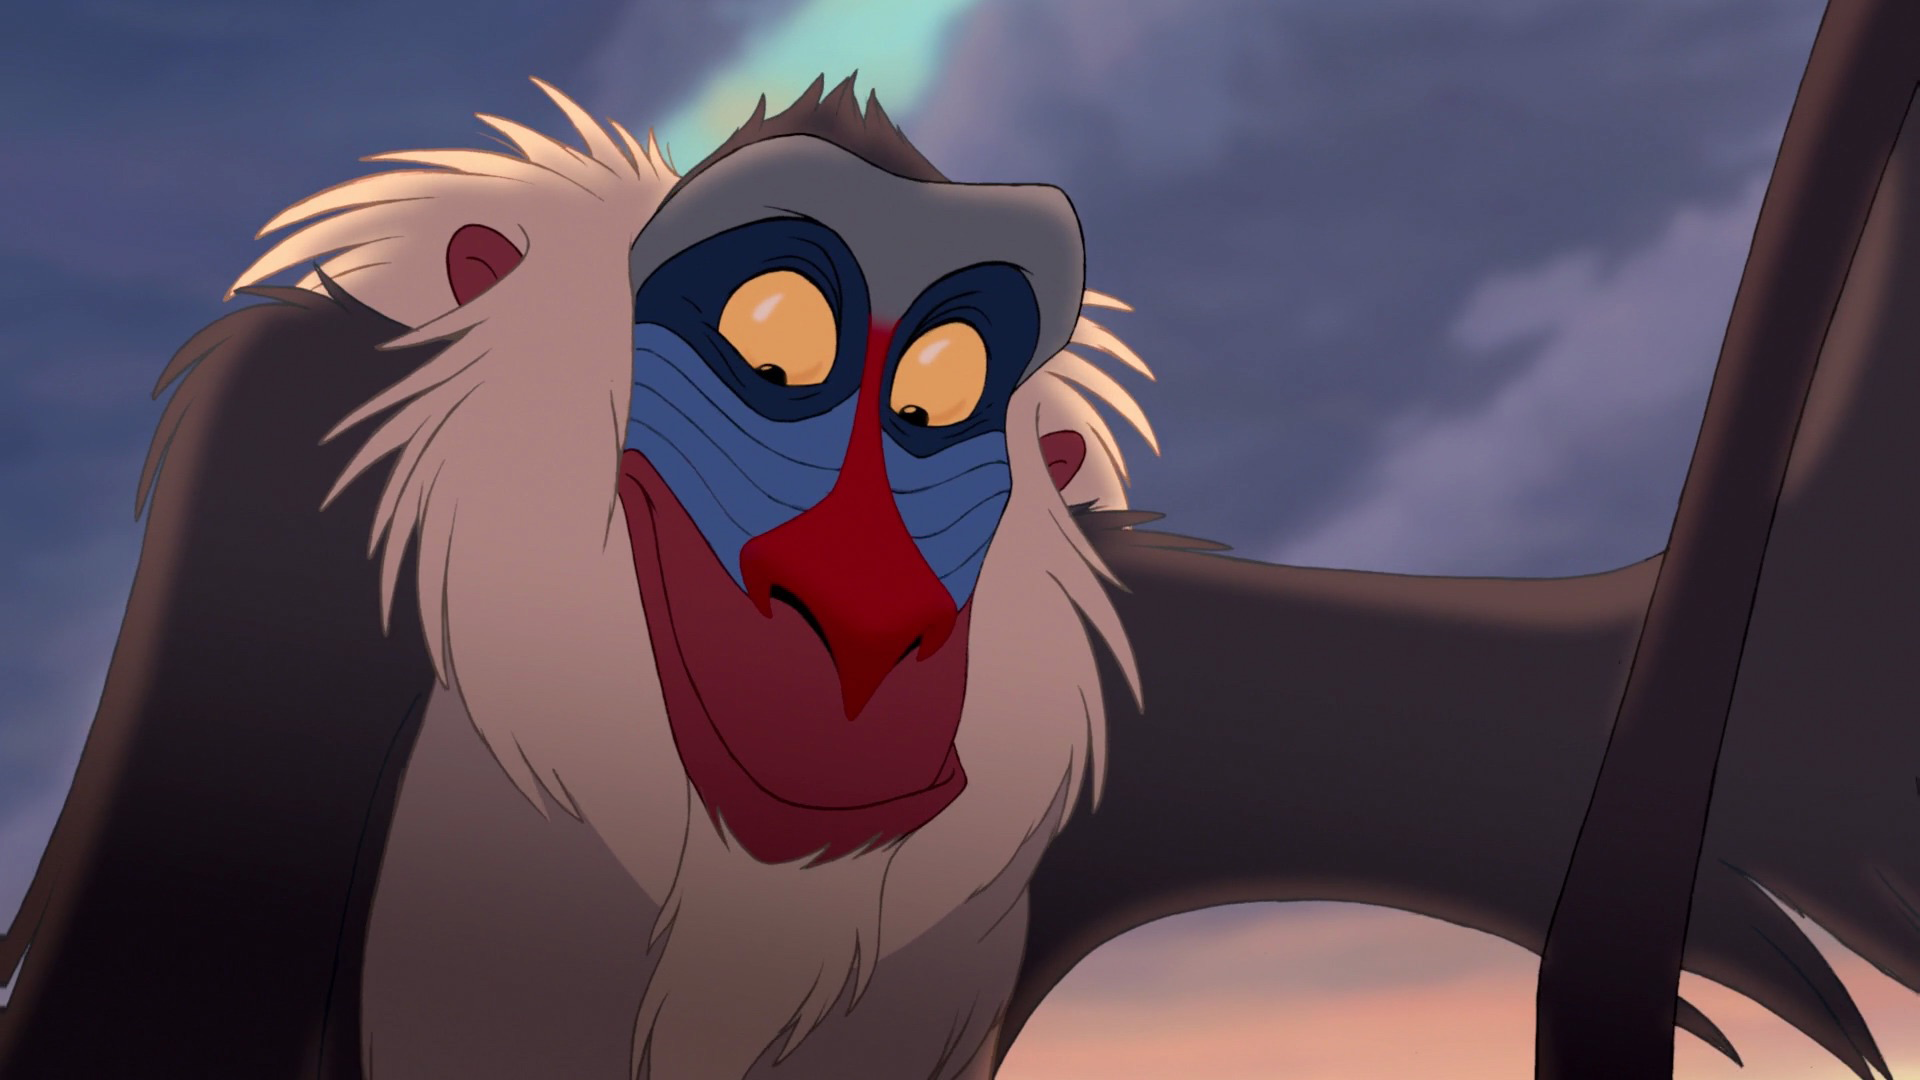 Rafiki from The Lion King 